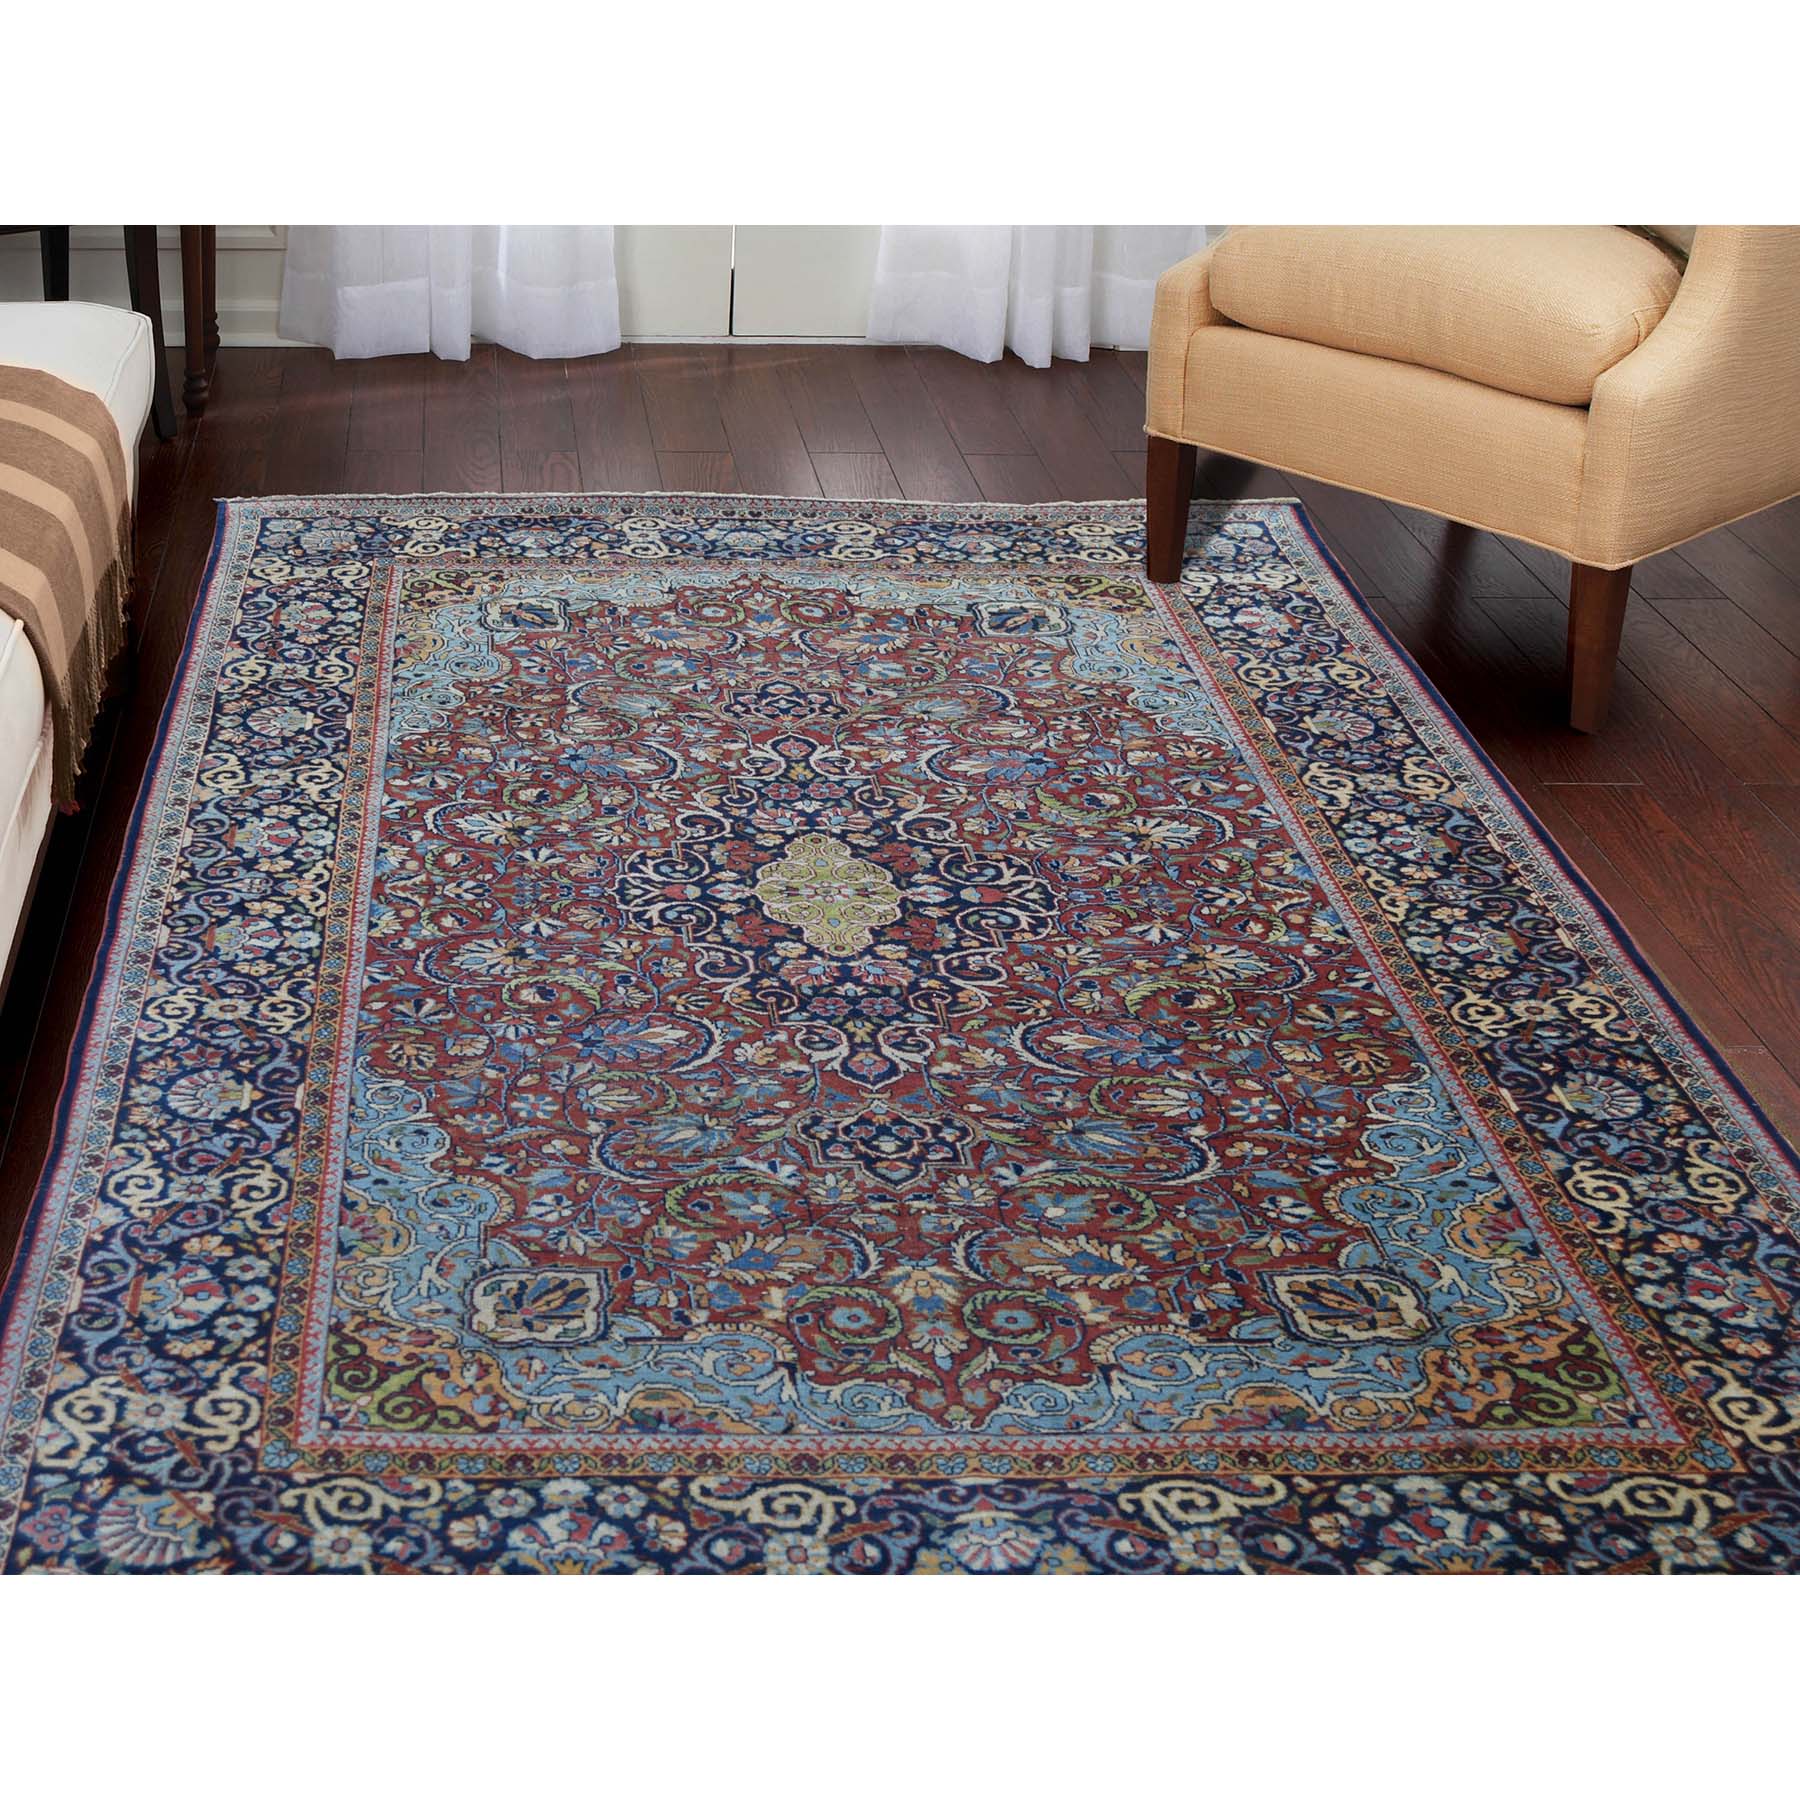 4-4 x6-5  Antique Persian Isfahan Good Condition Pure Wool Hand-Knotted Oriental Rug 